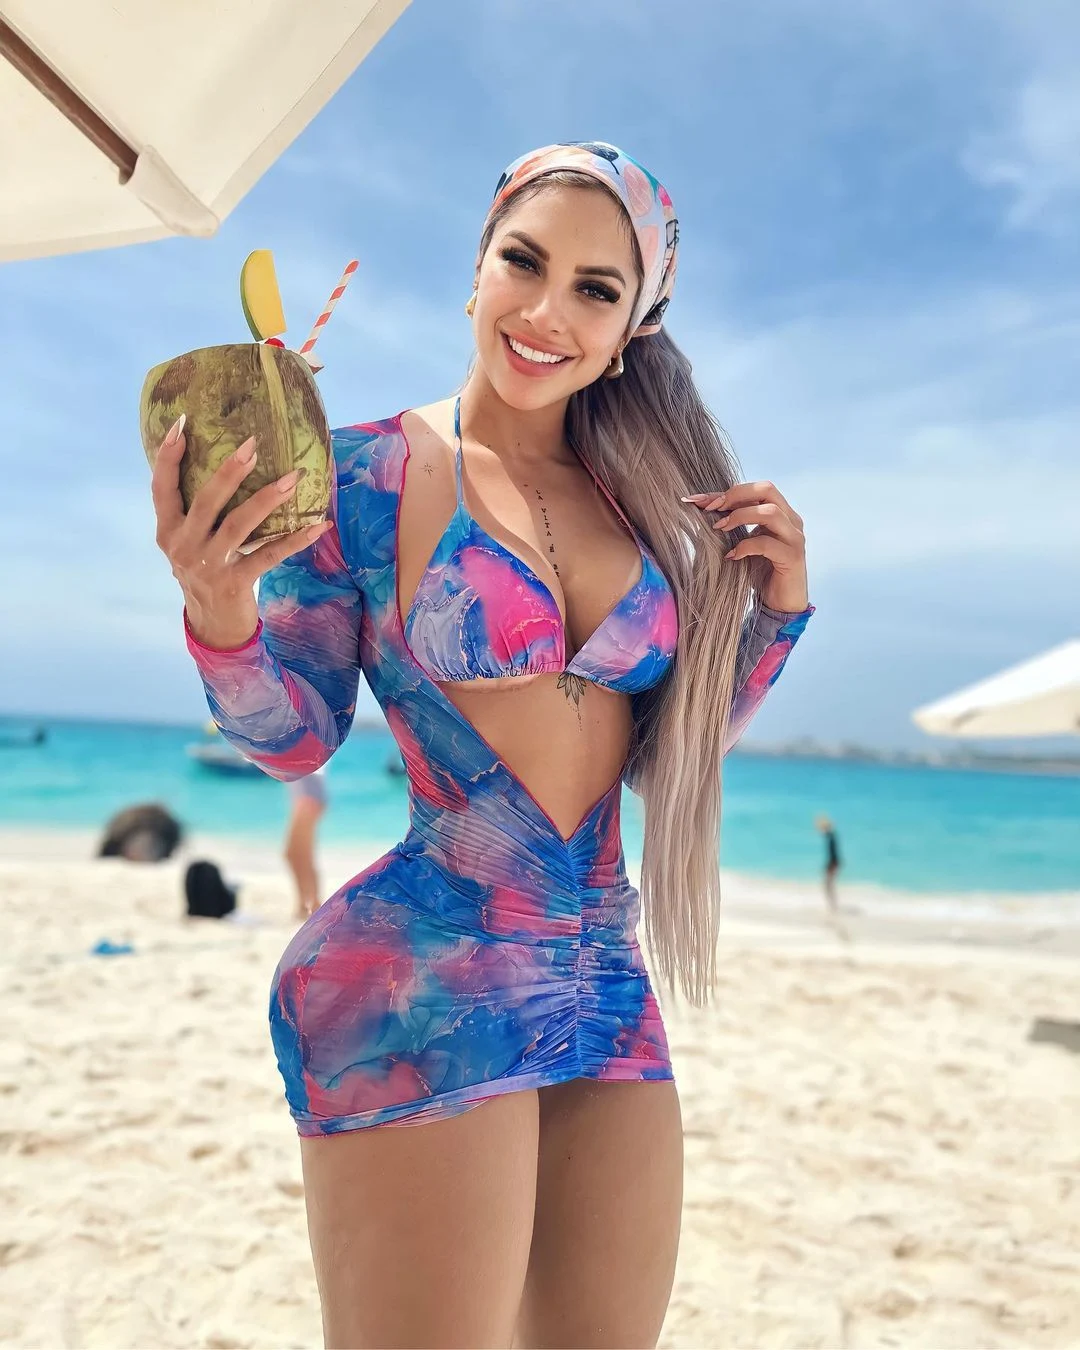 Colombia's sexiest policewoman takes social media by storm